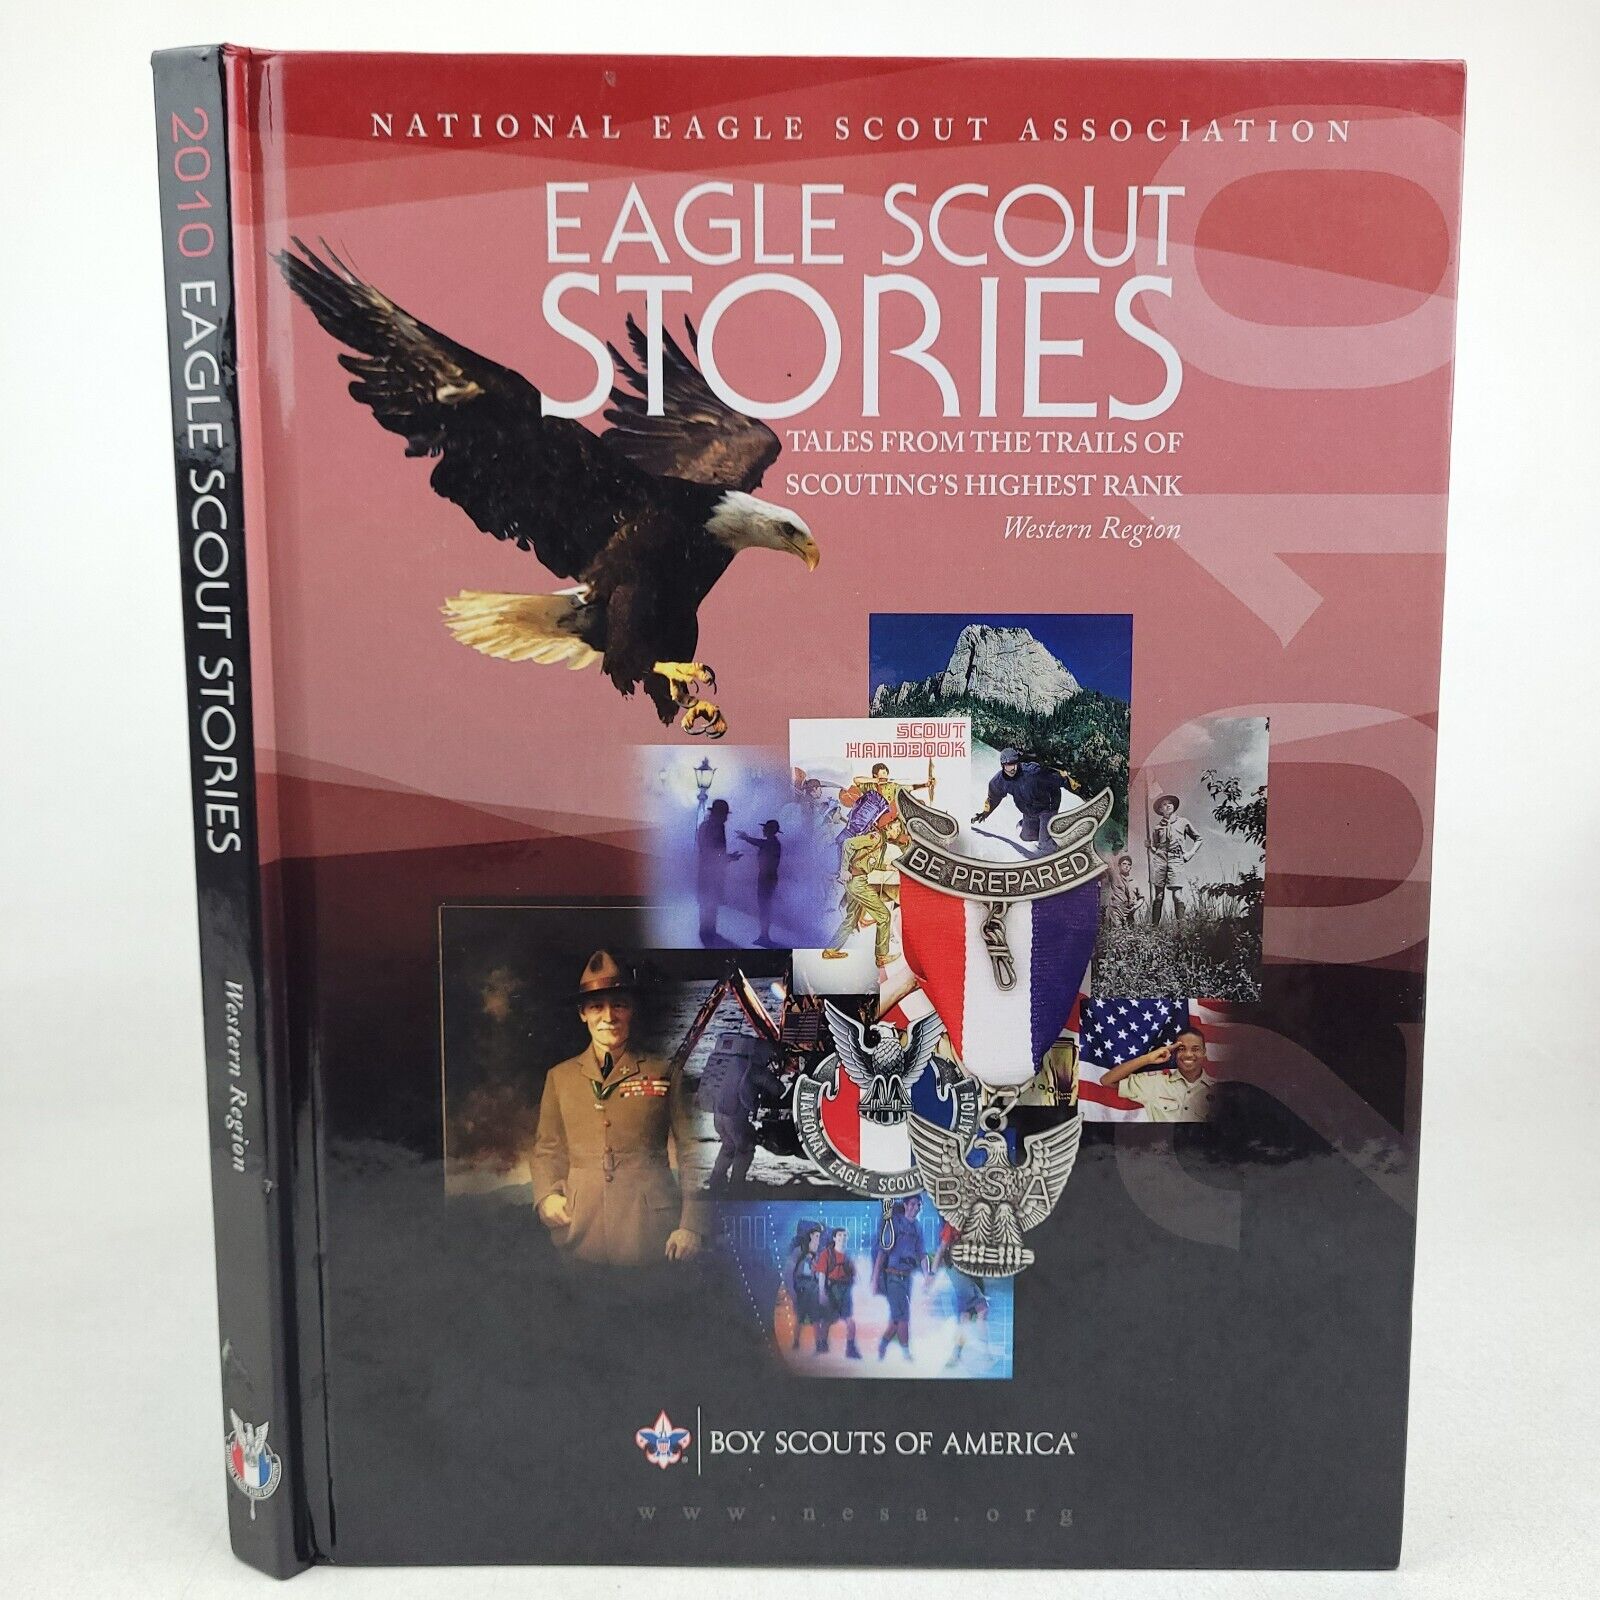 EAGLE SCOUT STORIES~2010 NEW HARDCOVER~WESTERN REGION~TALES FROM THE TRAILS